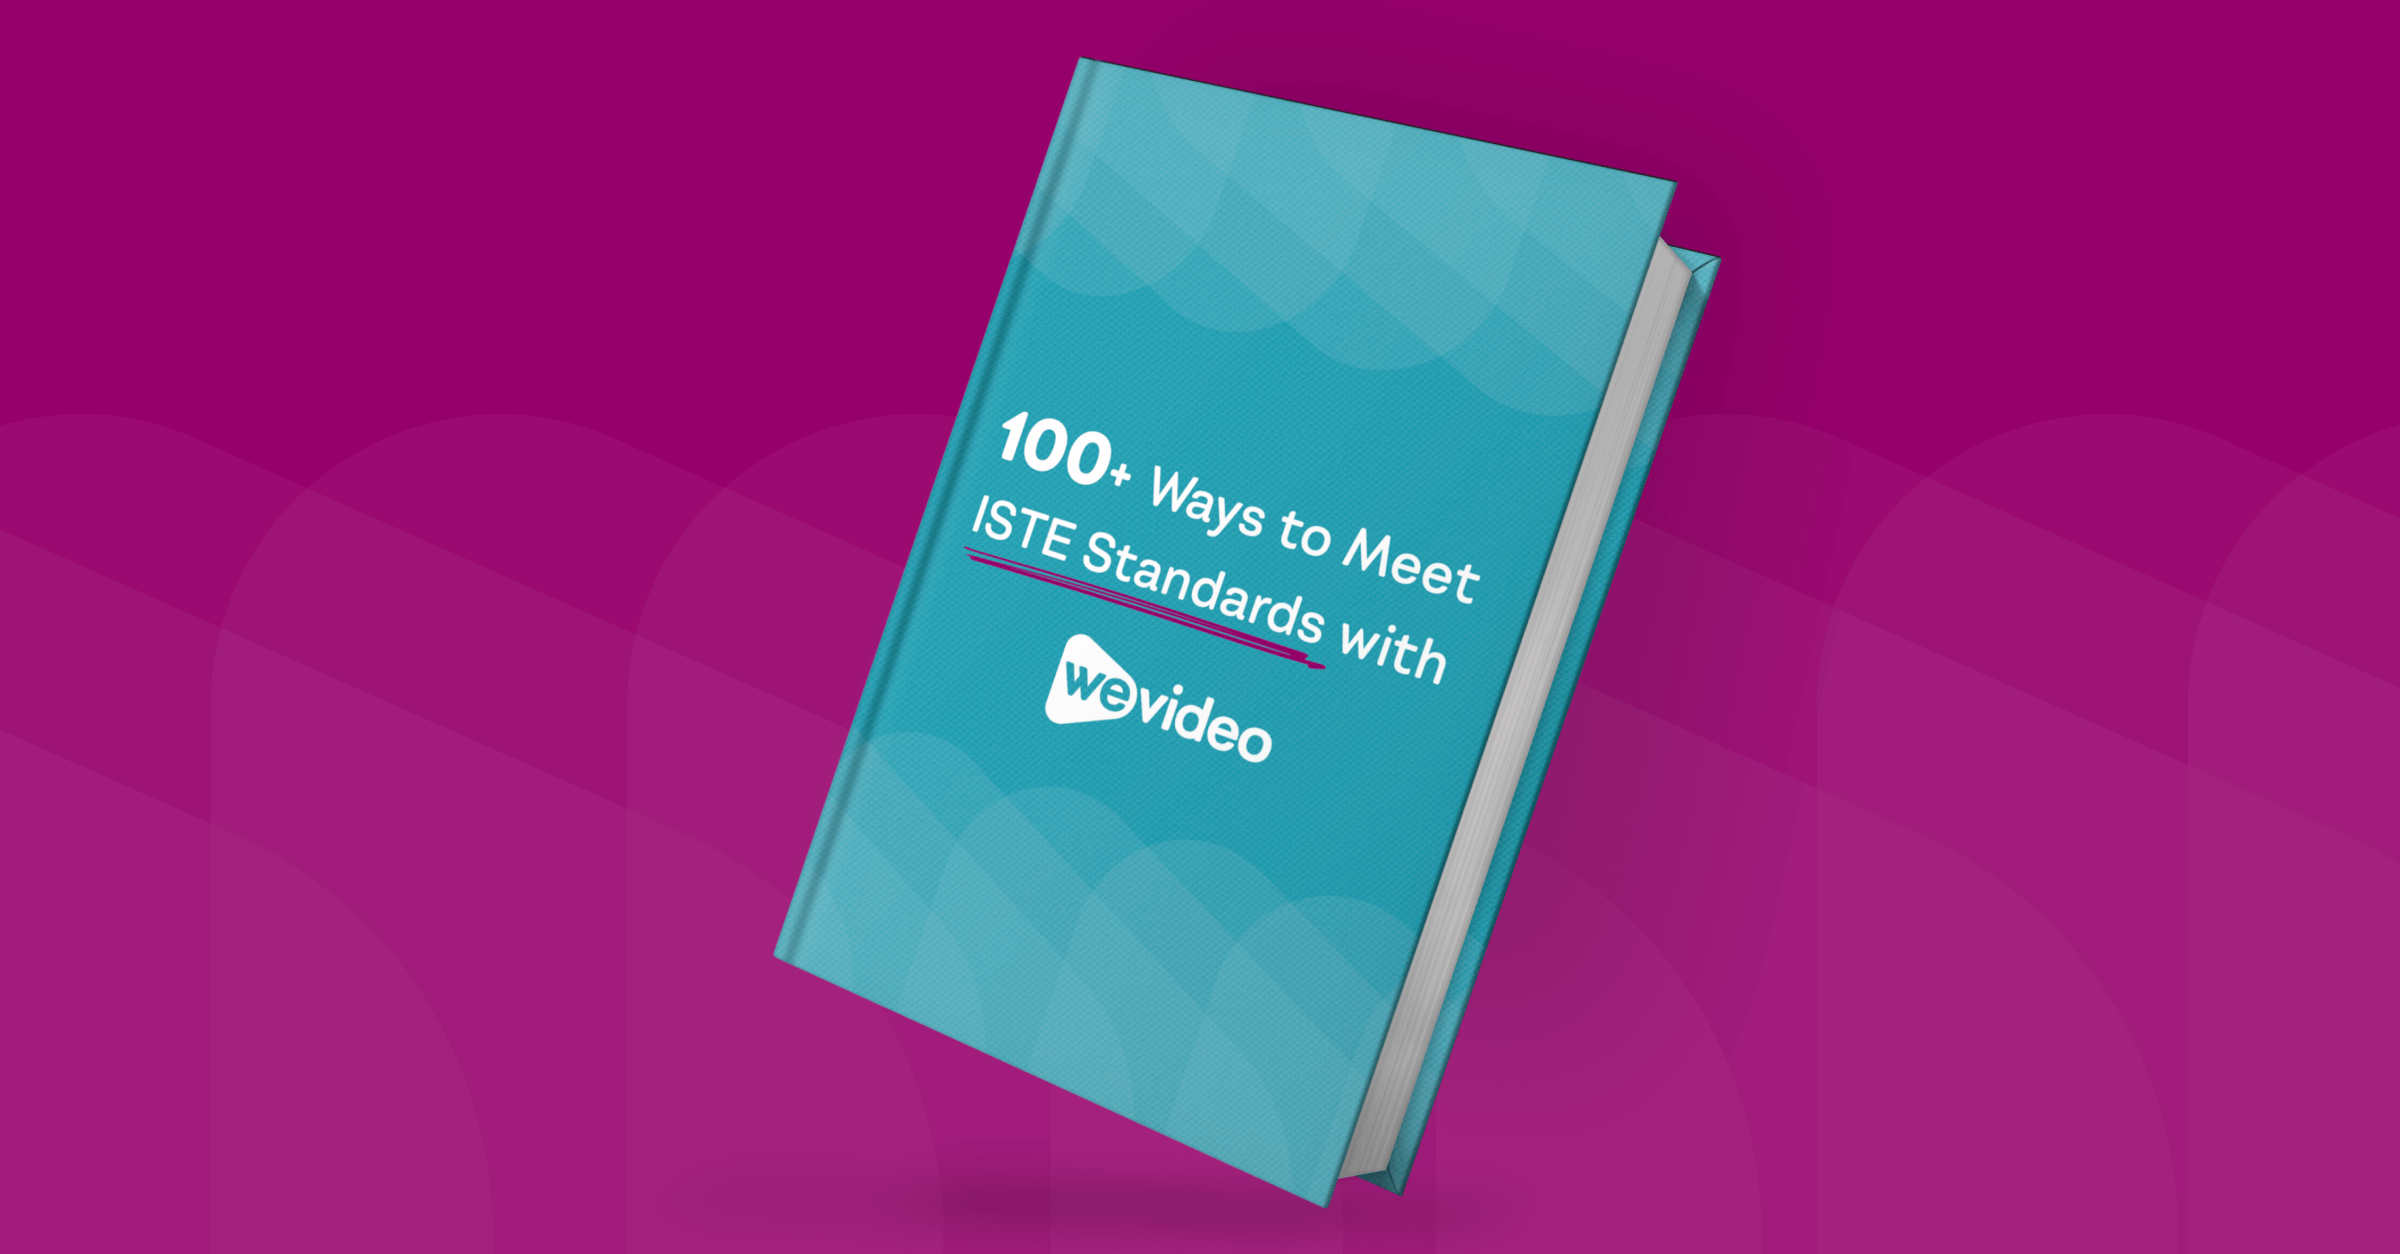 Magenta background. Teal book with title, 100+ Ways to Meet ISTE Standards with WeVideo.